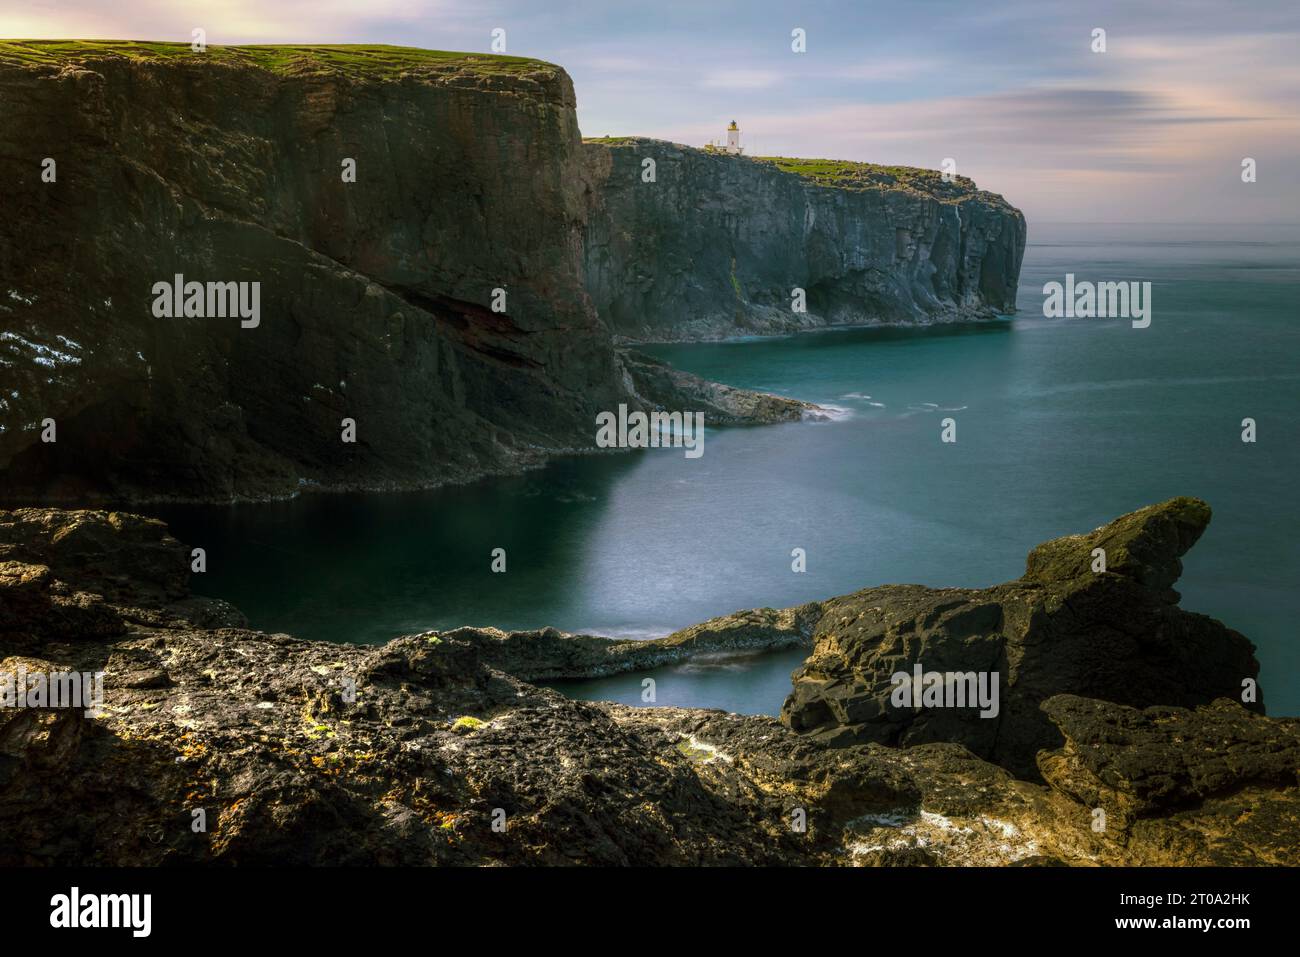 Volcanic rock formations and cliffs at Eshaness, Shetland Islands. Stock Photo